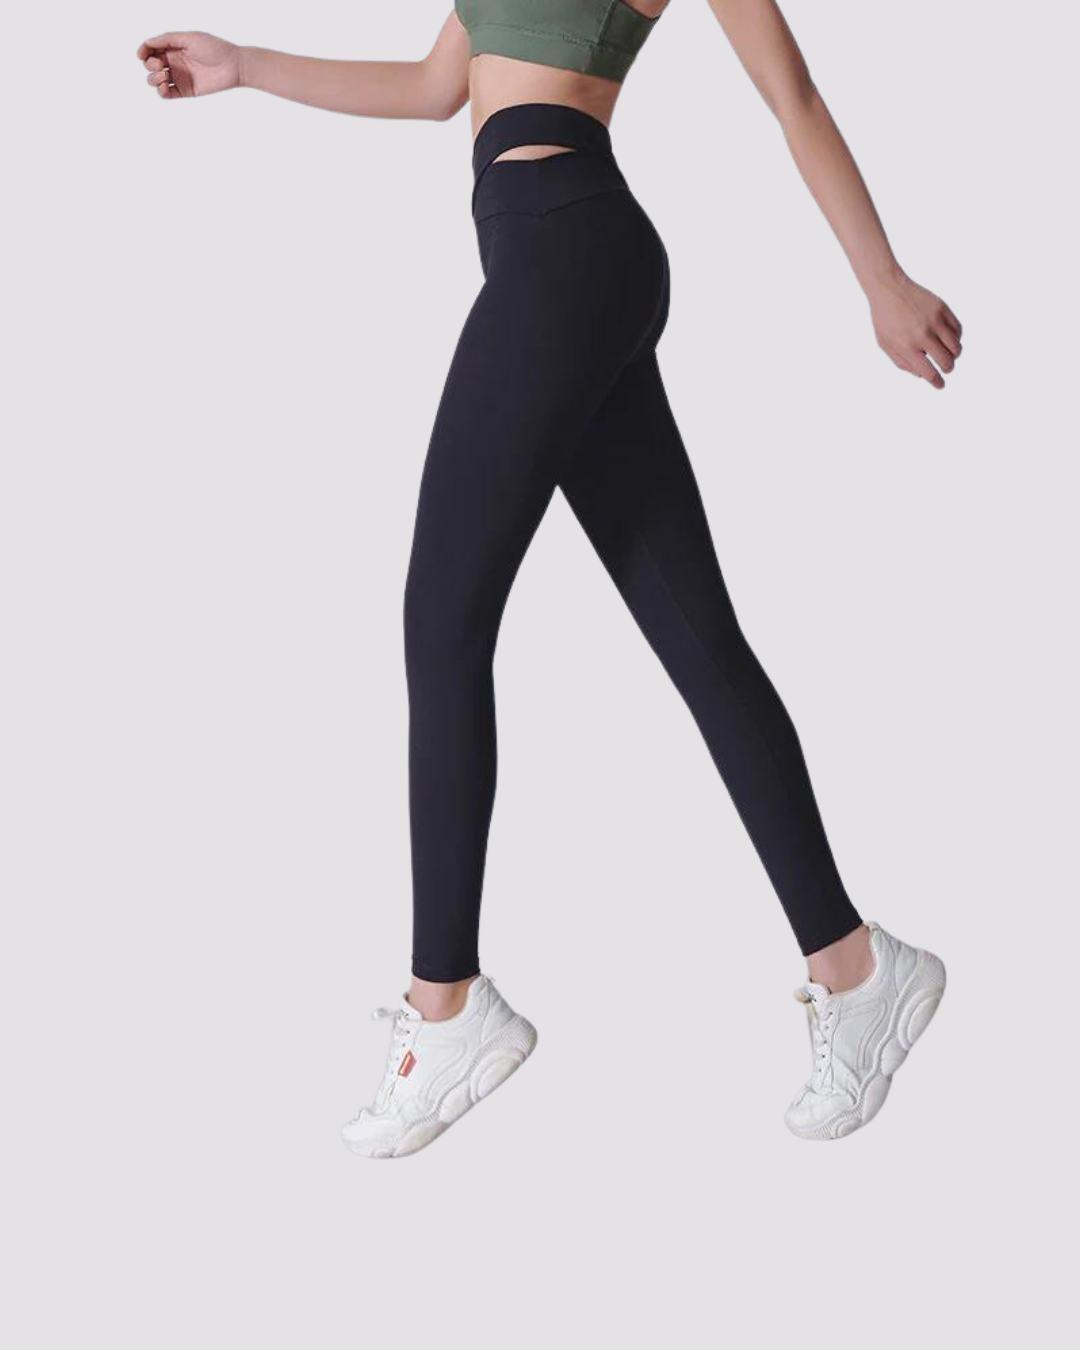 Frequent Leggings - The Entire Gym